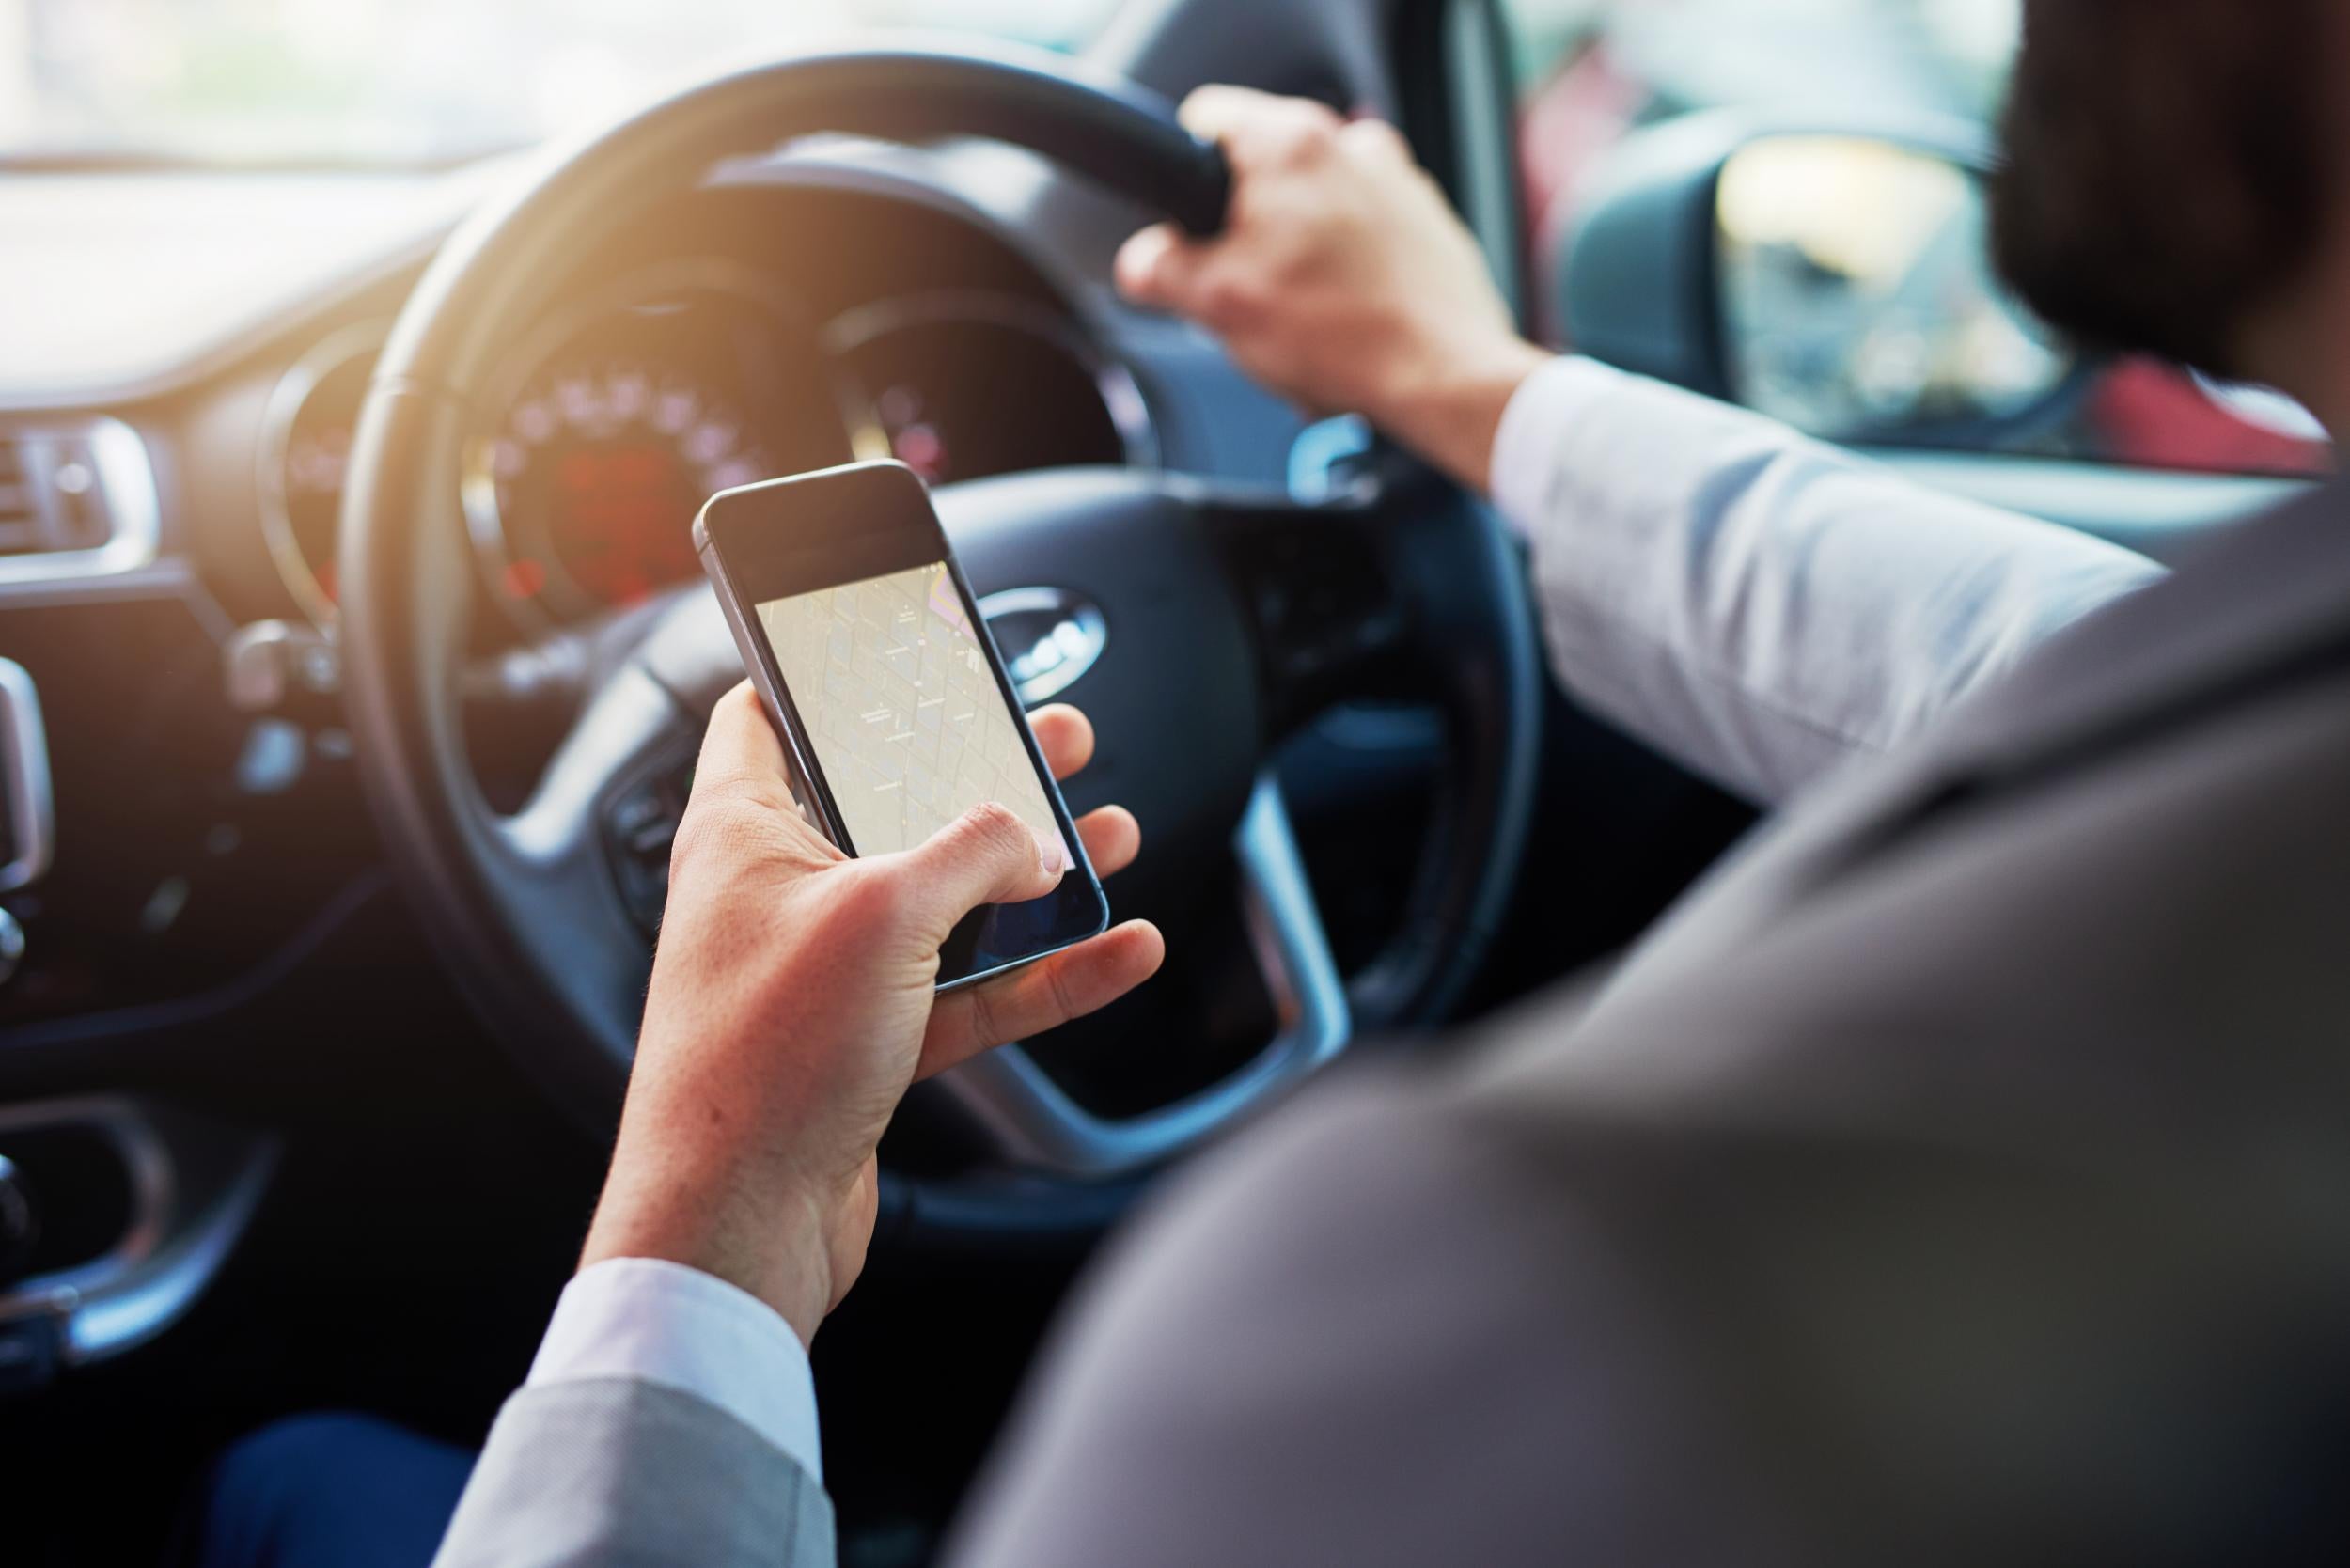 Driven to distraction: men are twice as likely as women to text and drive